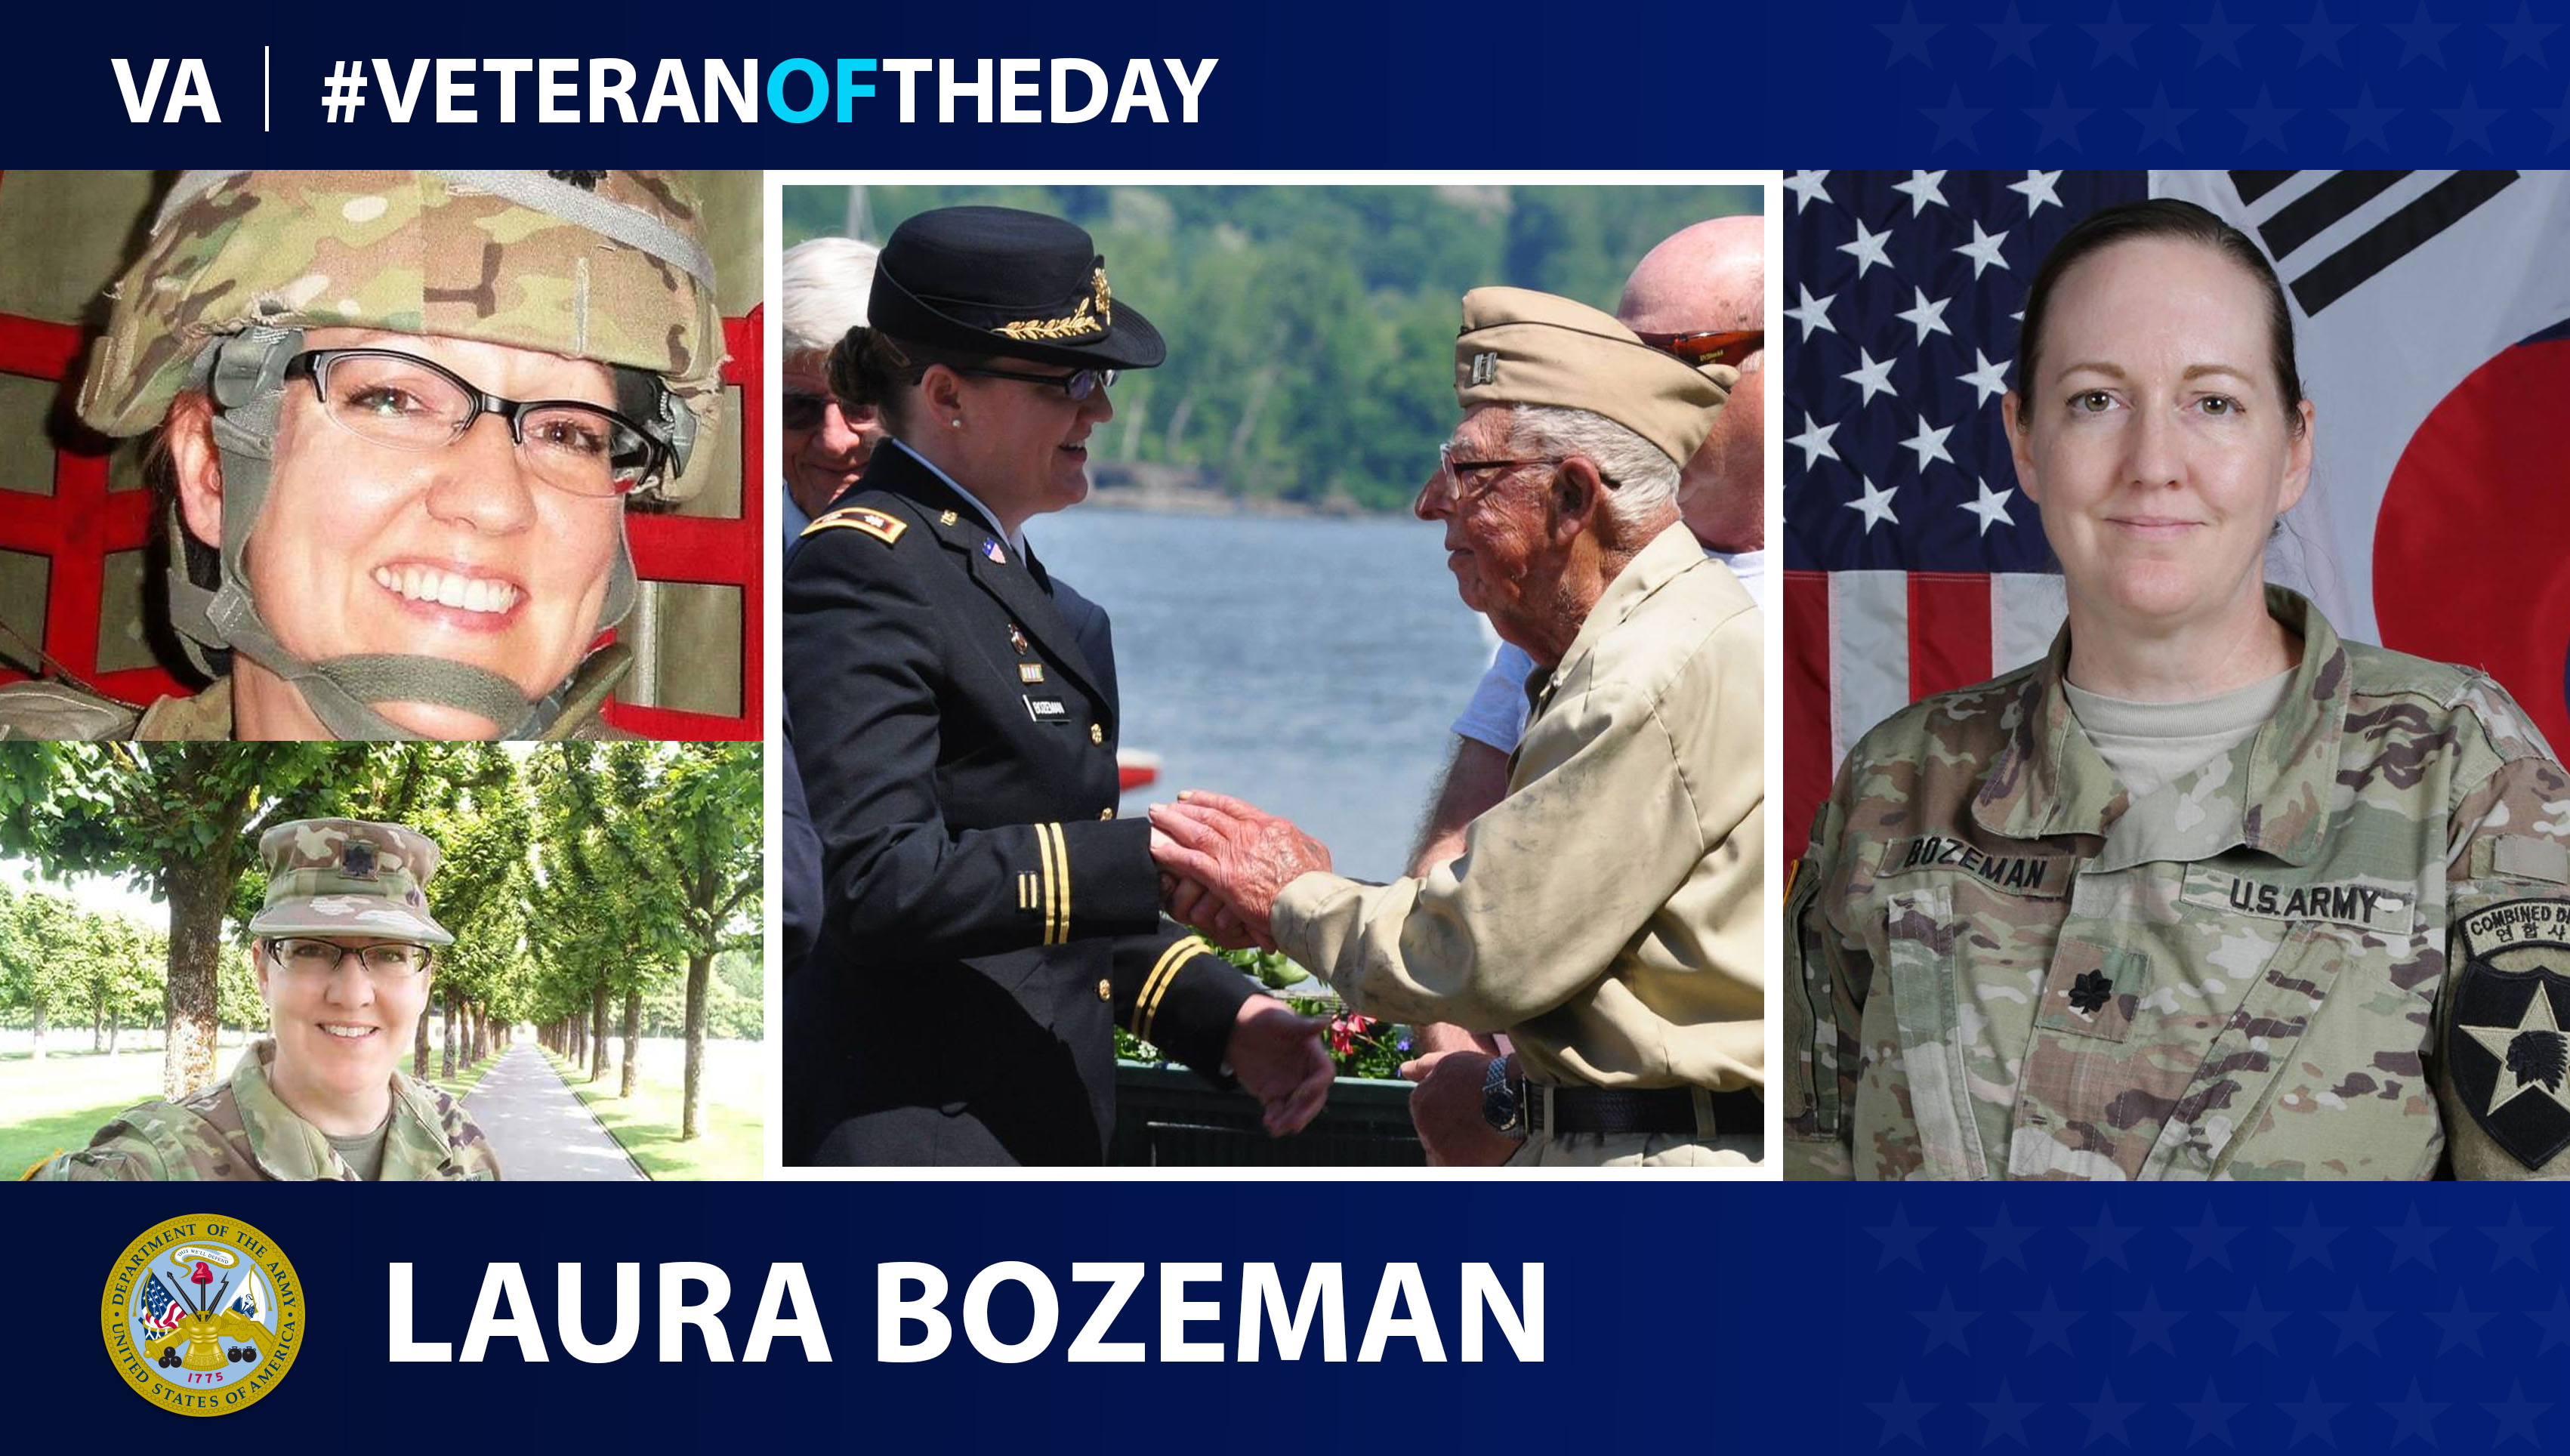 Army Veteran Laura Bozeman is today's Veteran of the Day.